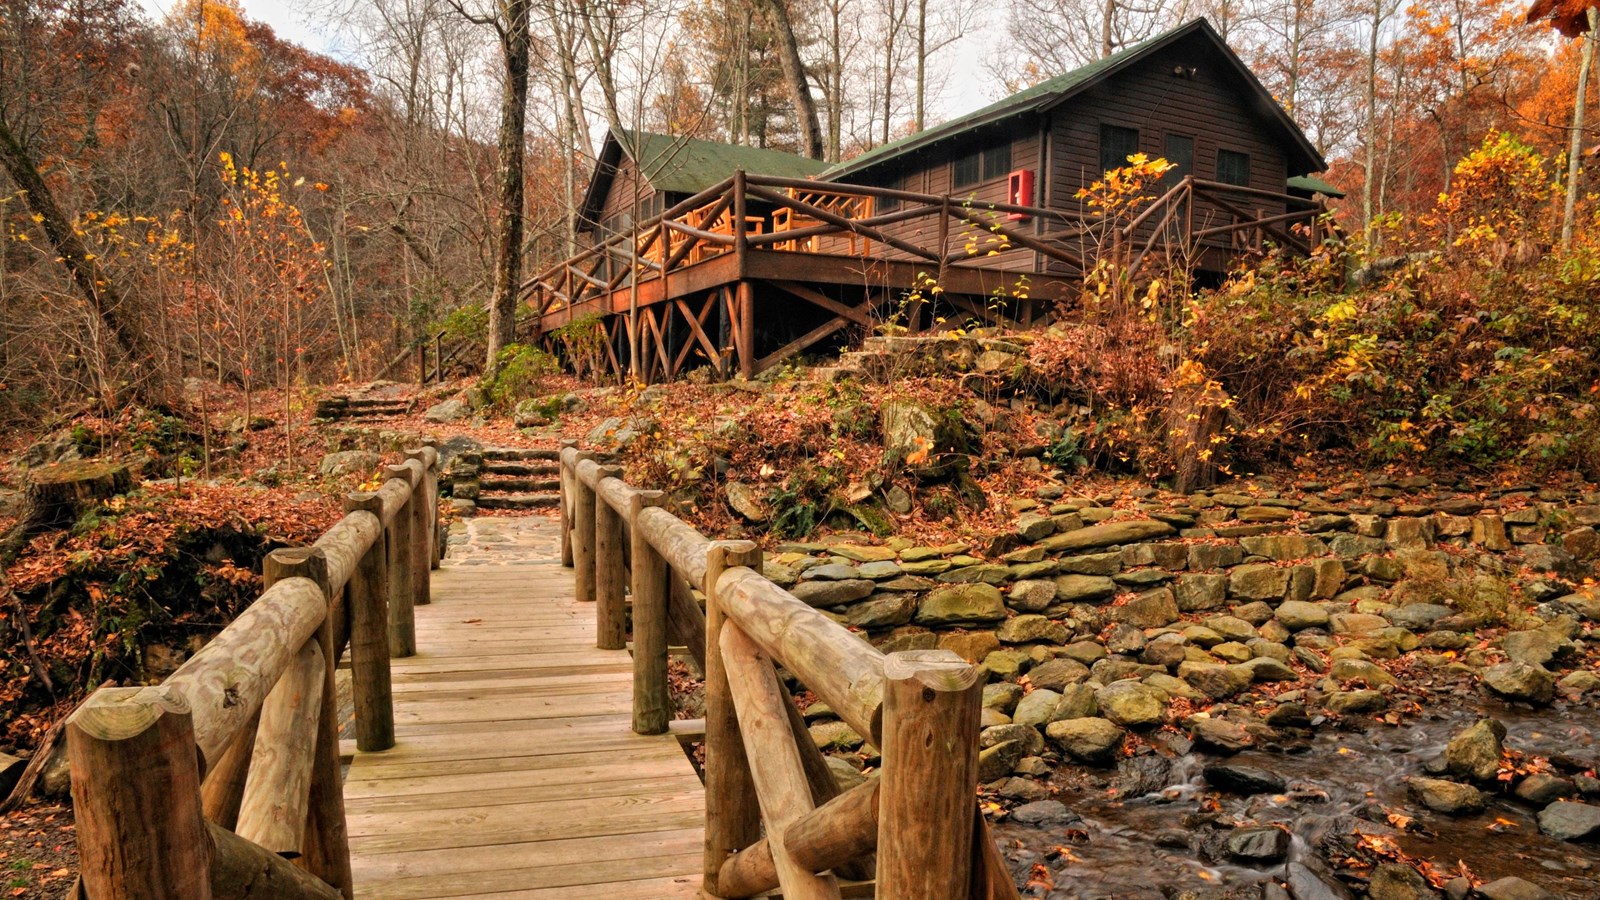 A wooden bridge leads across a mountain stream to a brown cabin in the woods.